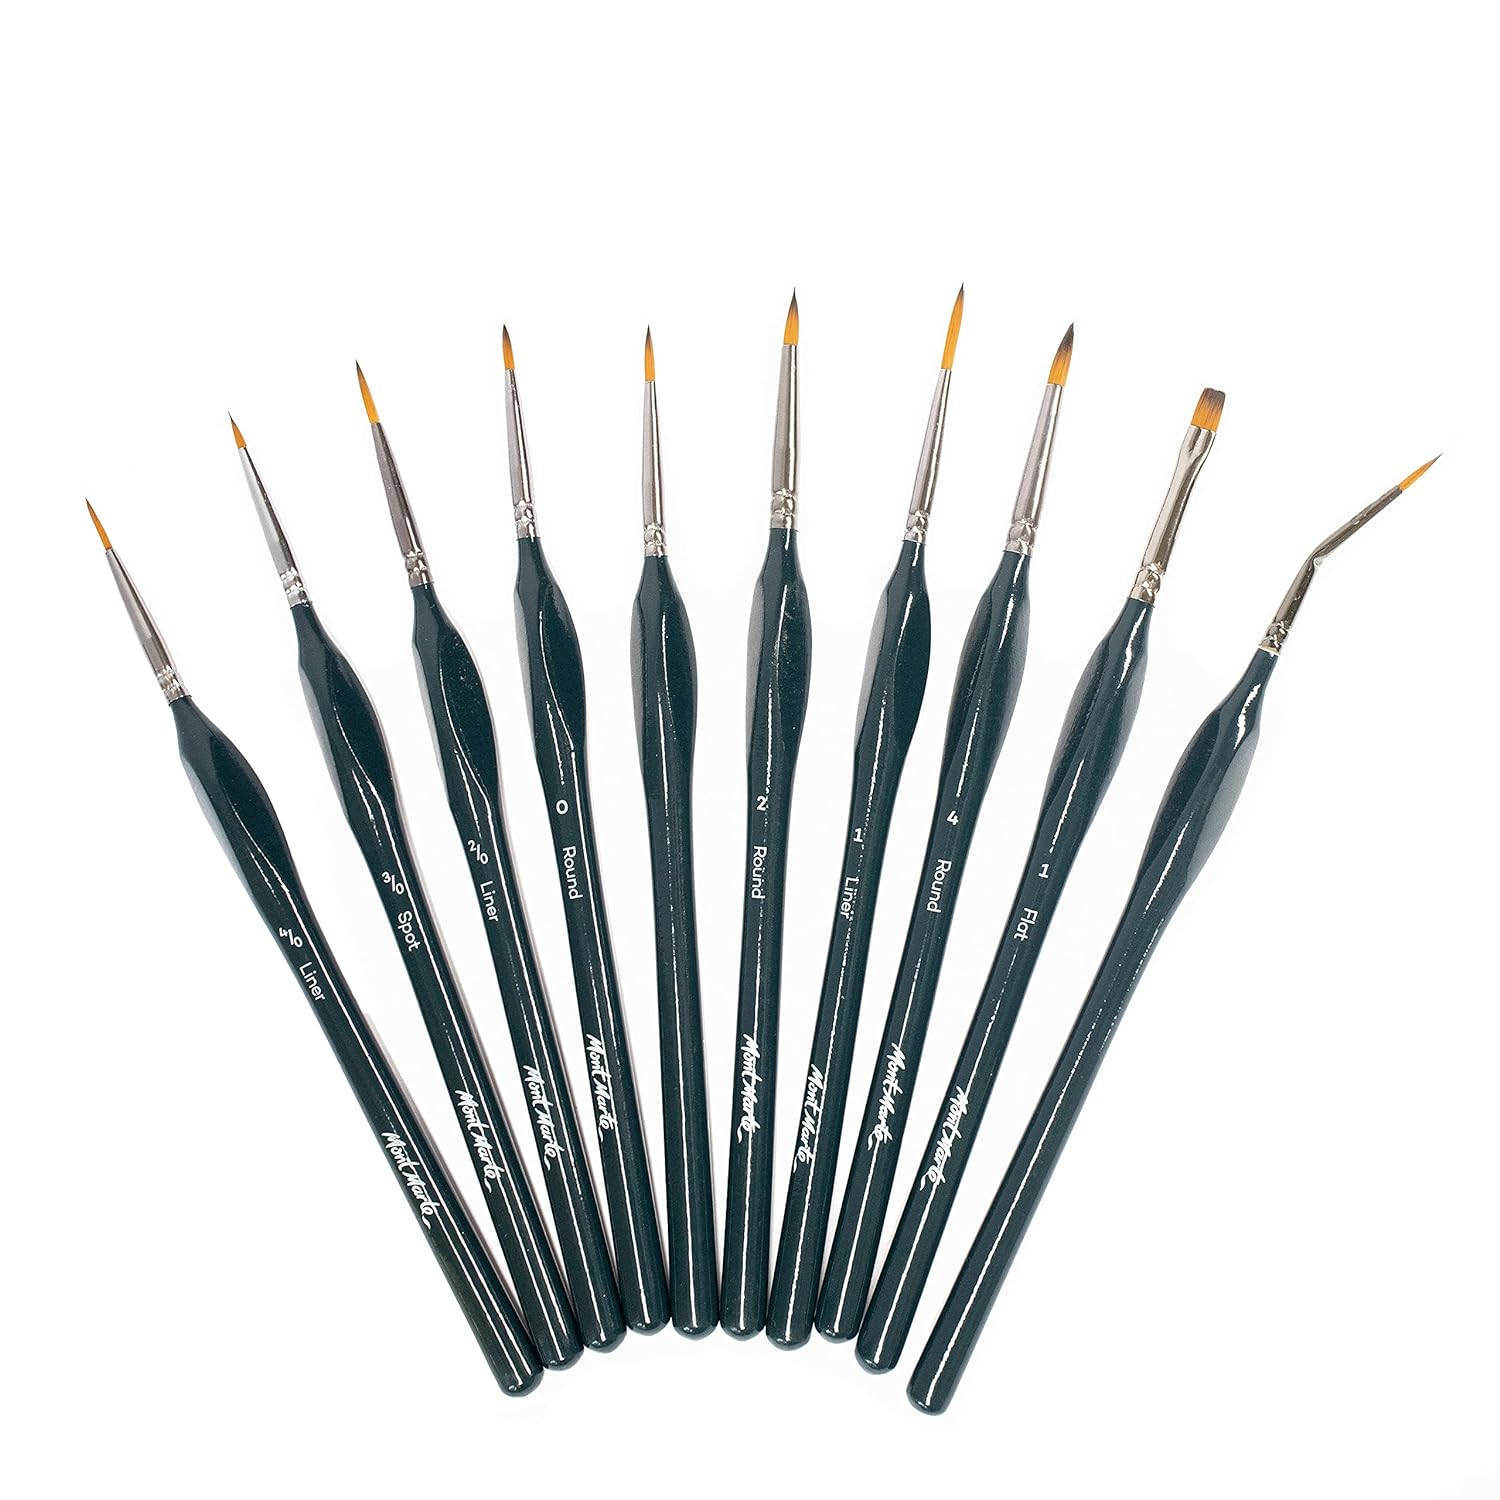 Mont Marte Fine Brush Set - 10 Fine Brushes - Ideal Detail Brushes for Acrylic Paints, Watercolours,